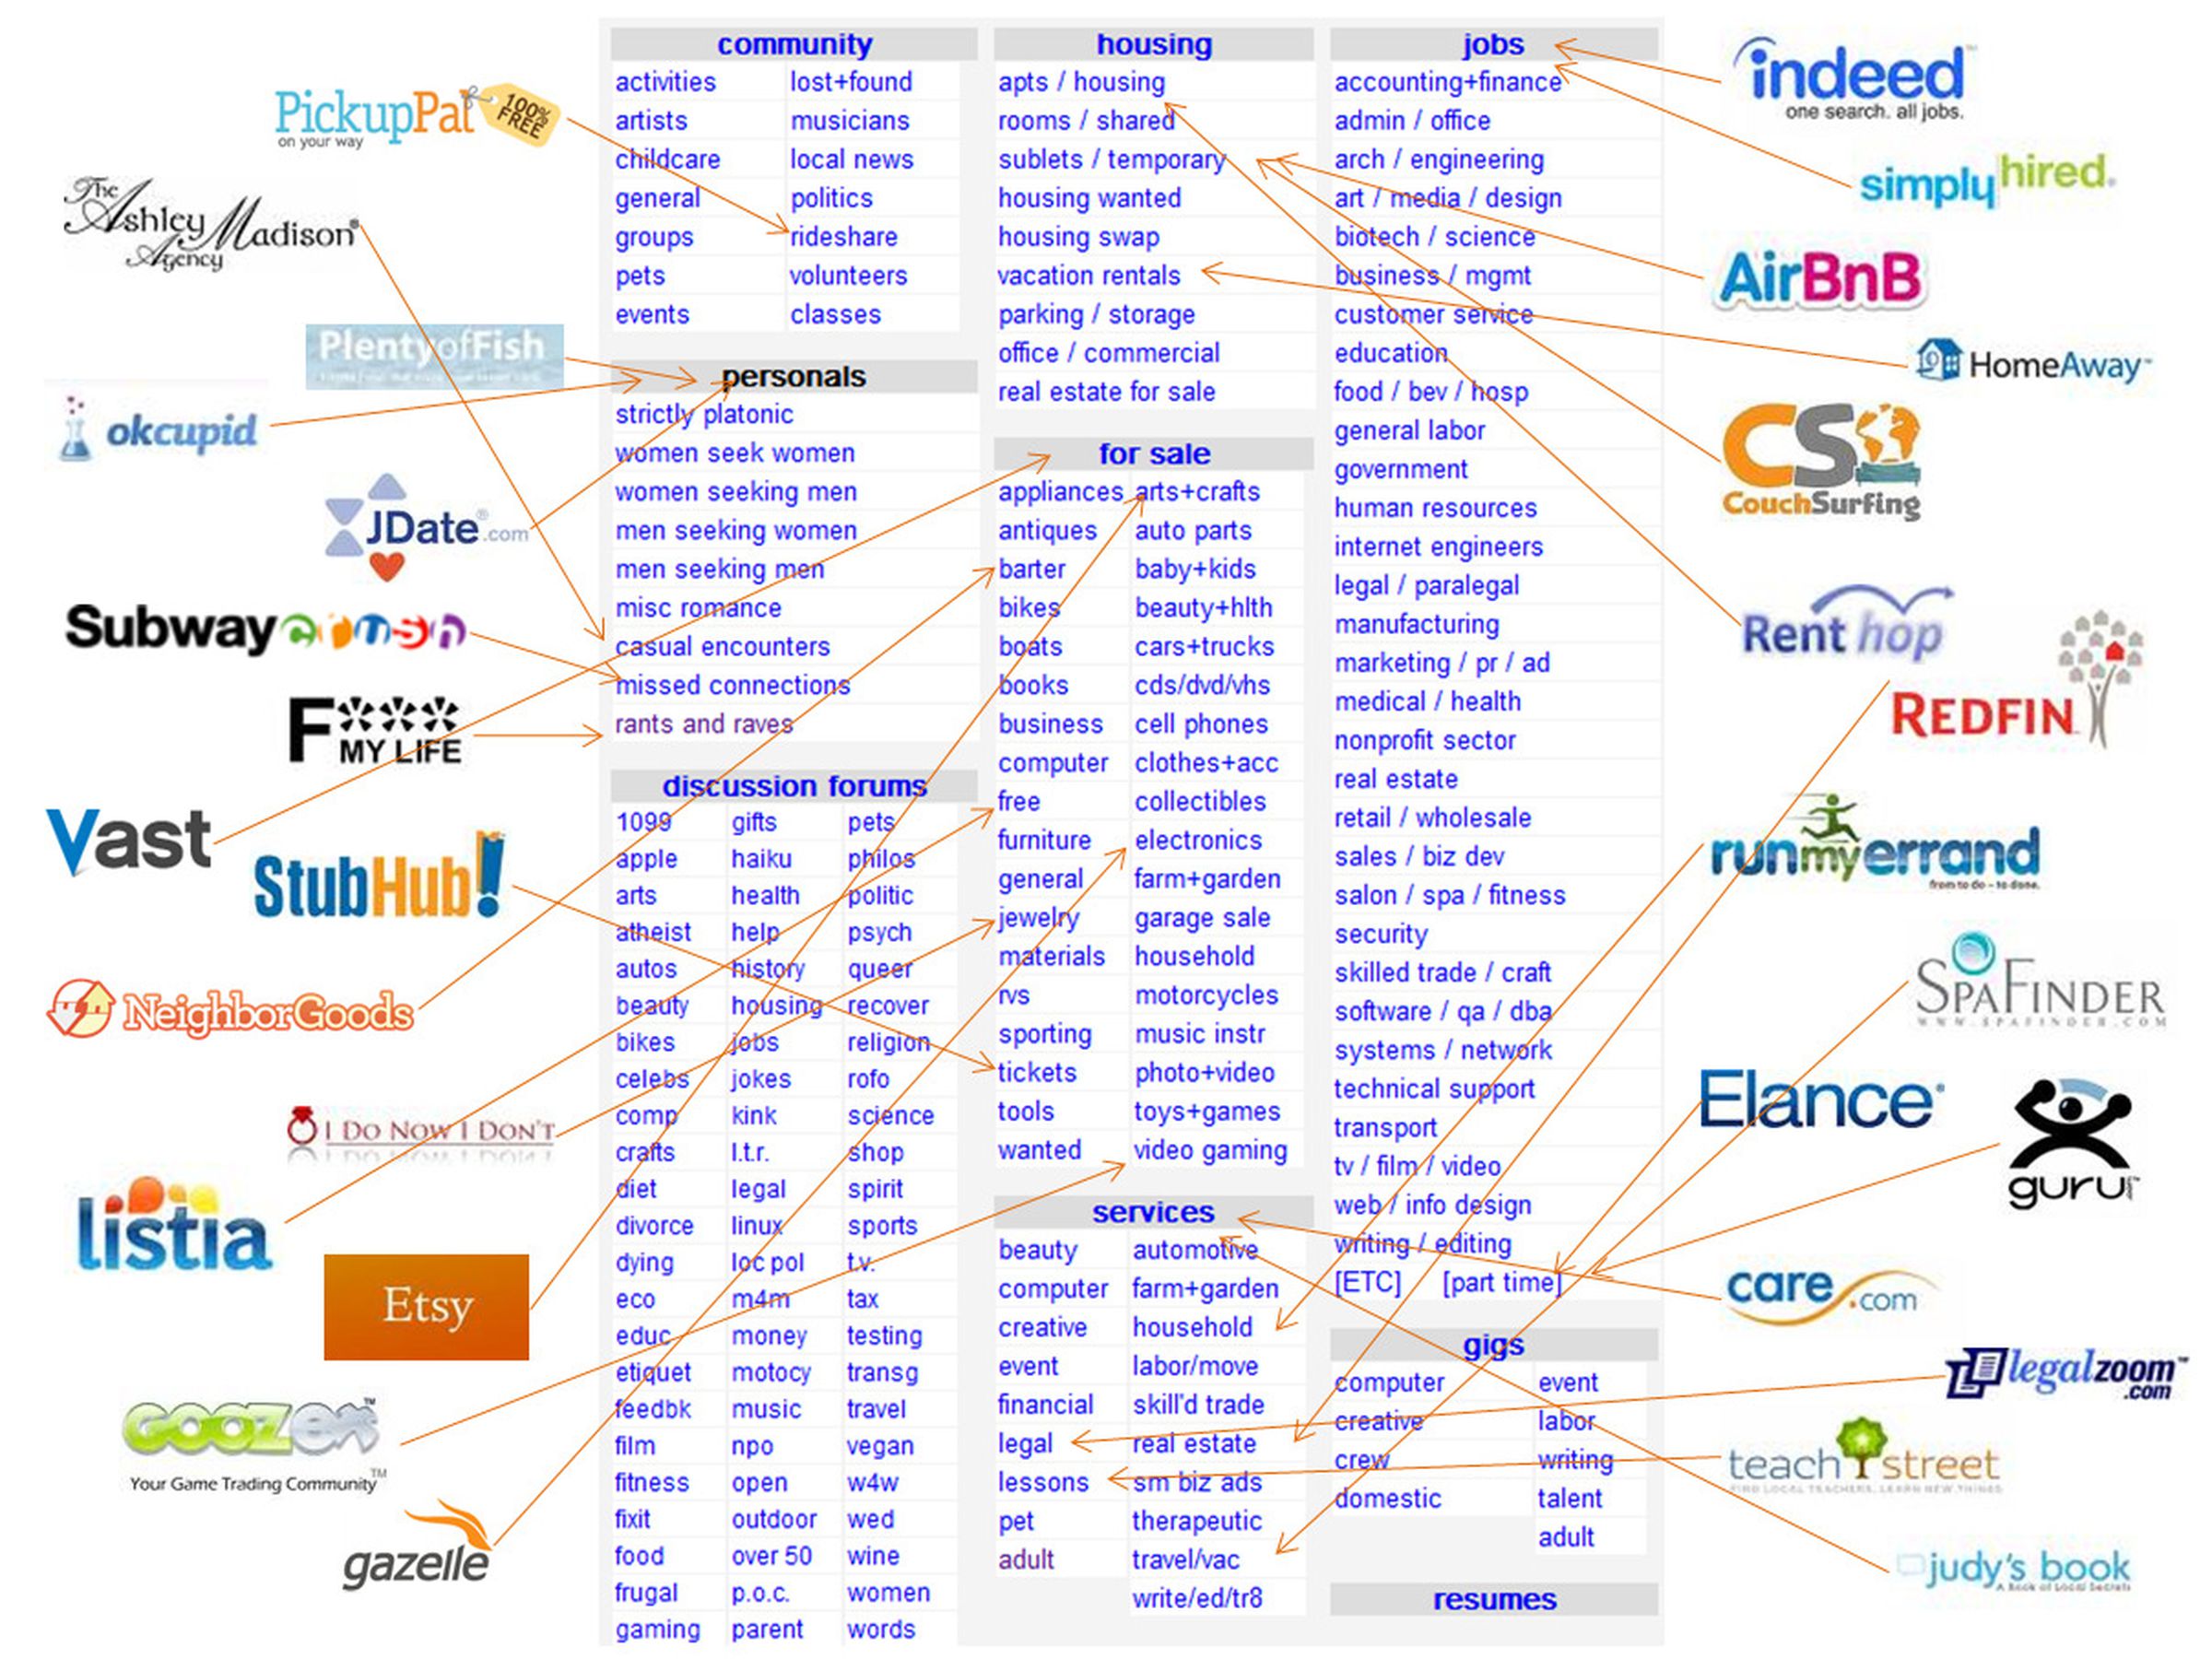 An image of a Craigslist homepage, with many startups pointing to the part of Craigslist they competed with.